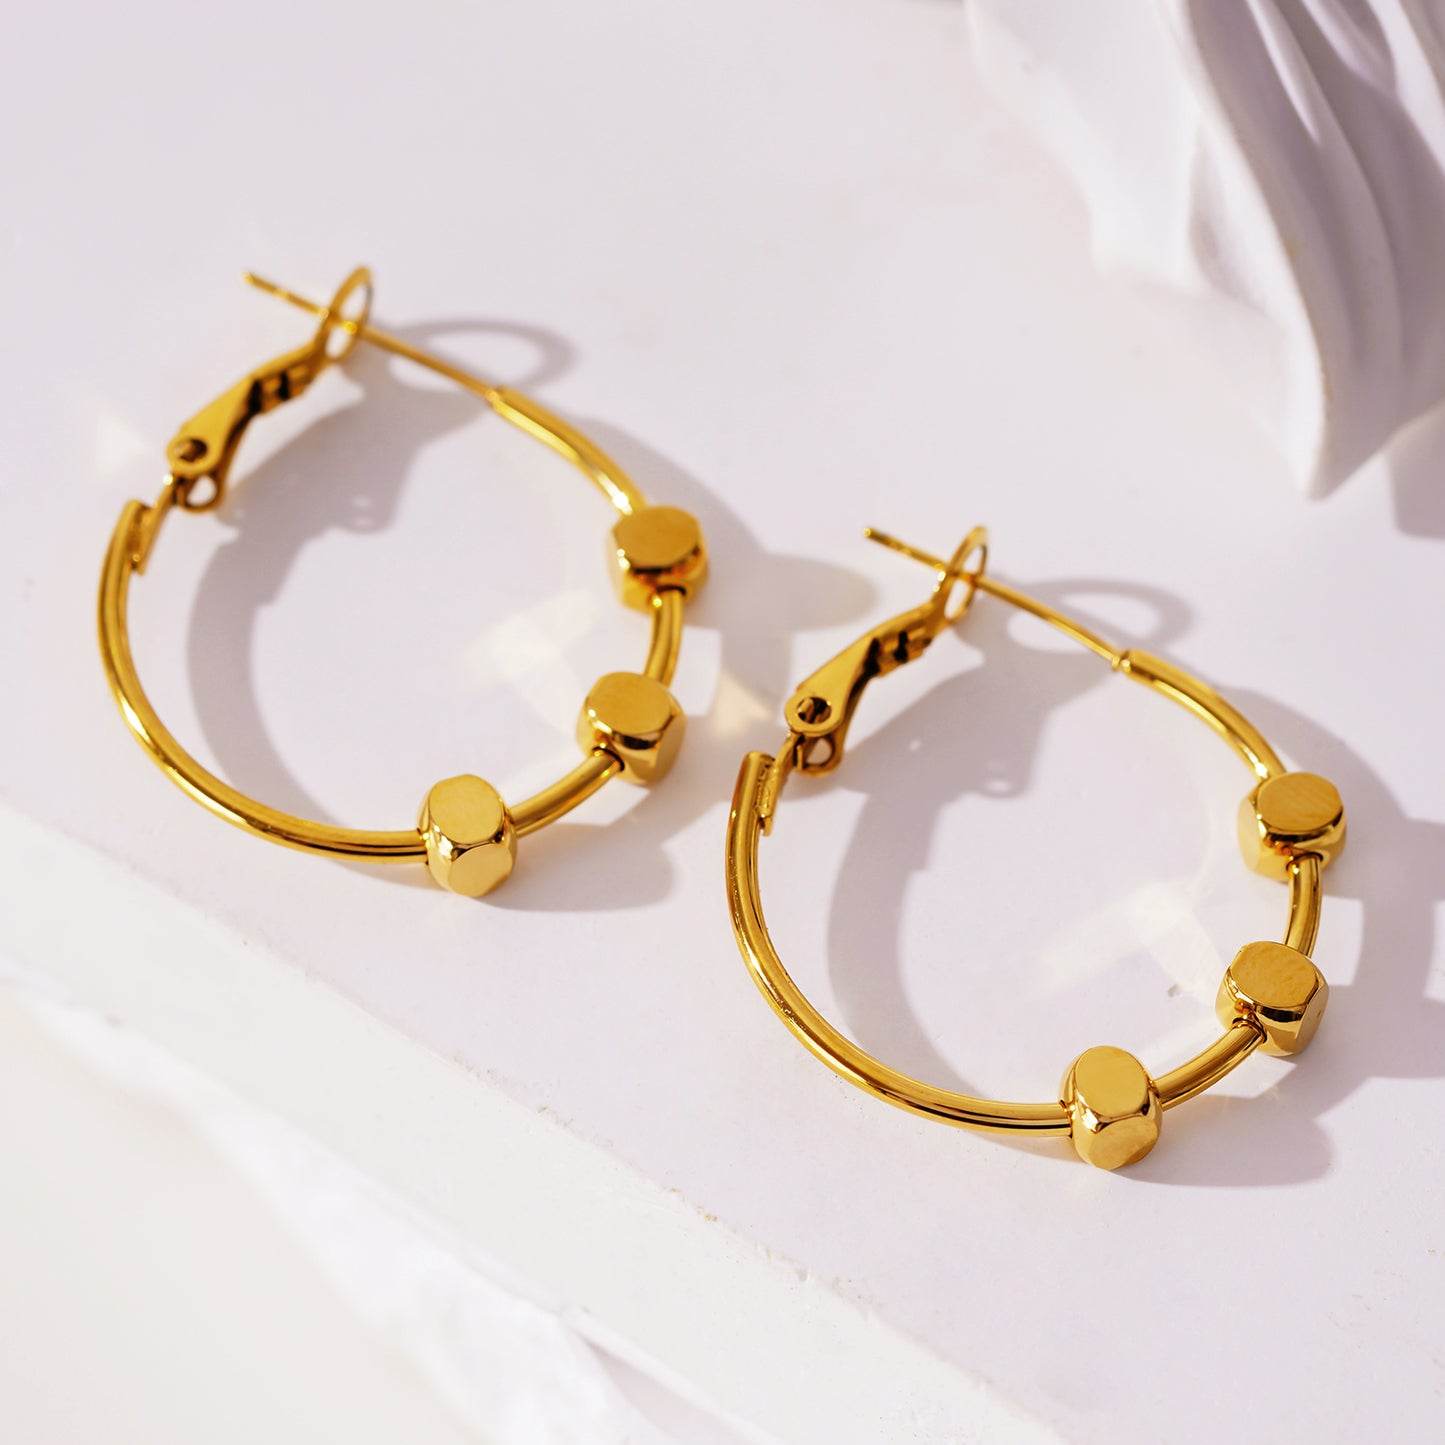 Style MASUYO 1079: Avant-Garde Rounded Hoop Earrings Anchoring a Trio of Square Beads.